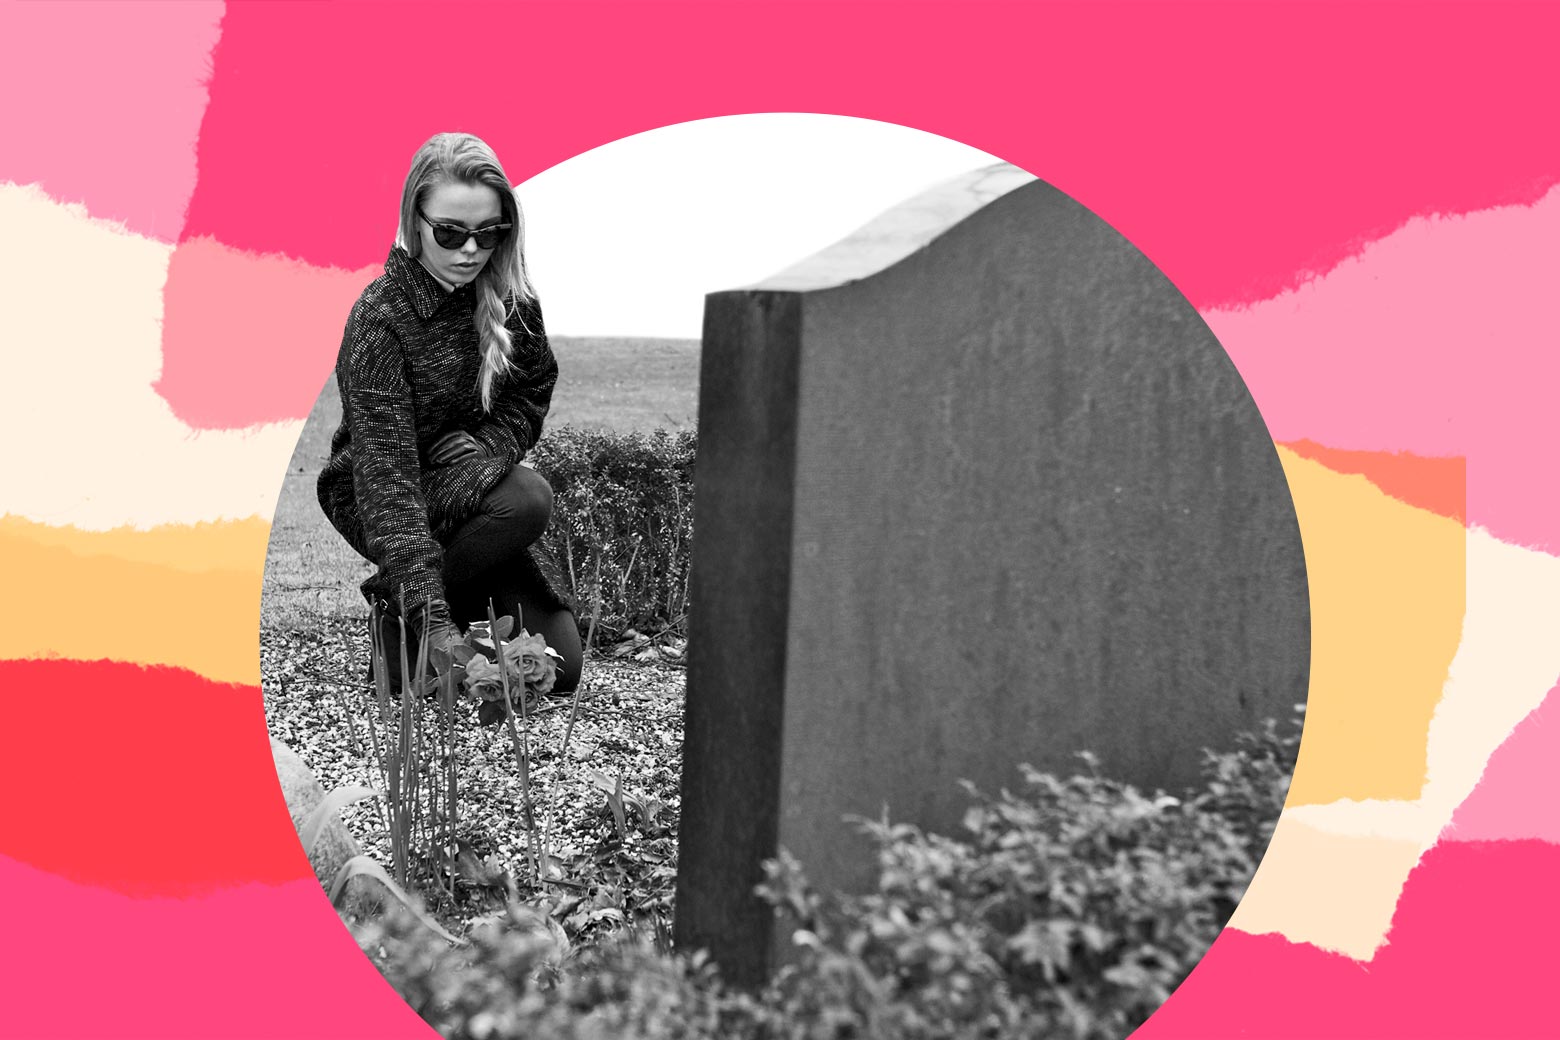 Woman dressed in black visiting a grave.